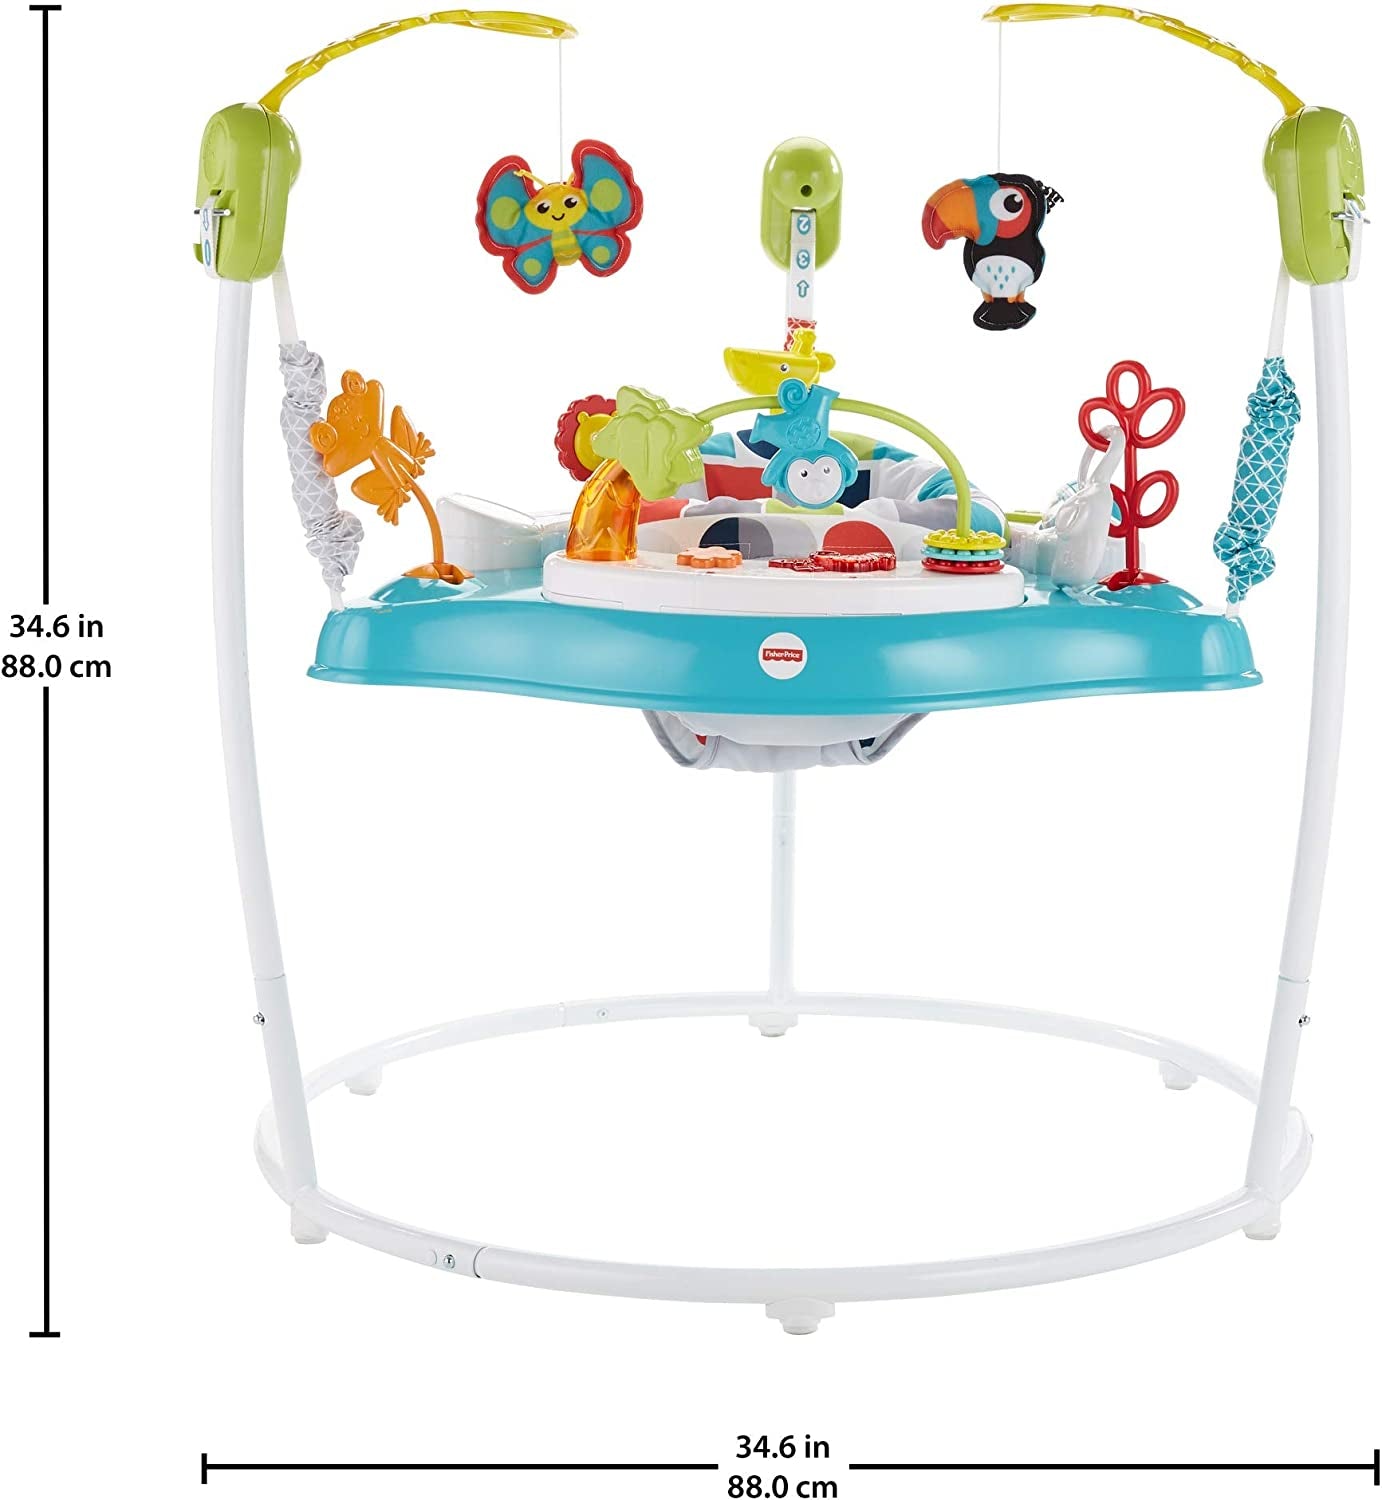 Fisher-Price Color Climbers Jumperoo, Freestanding Bouncing Baby Activity Center with Lights, Music and Toys - GWD42